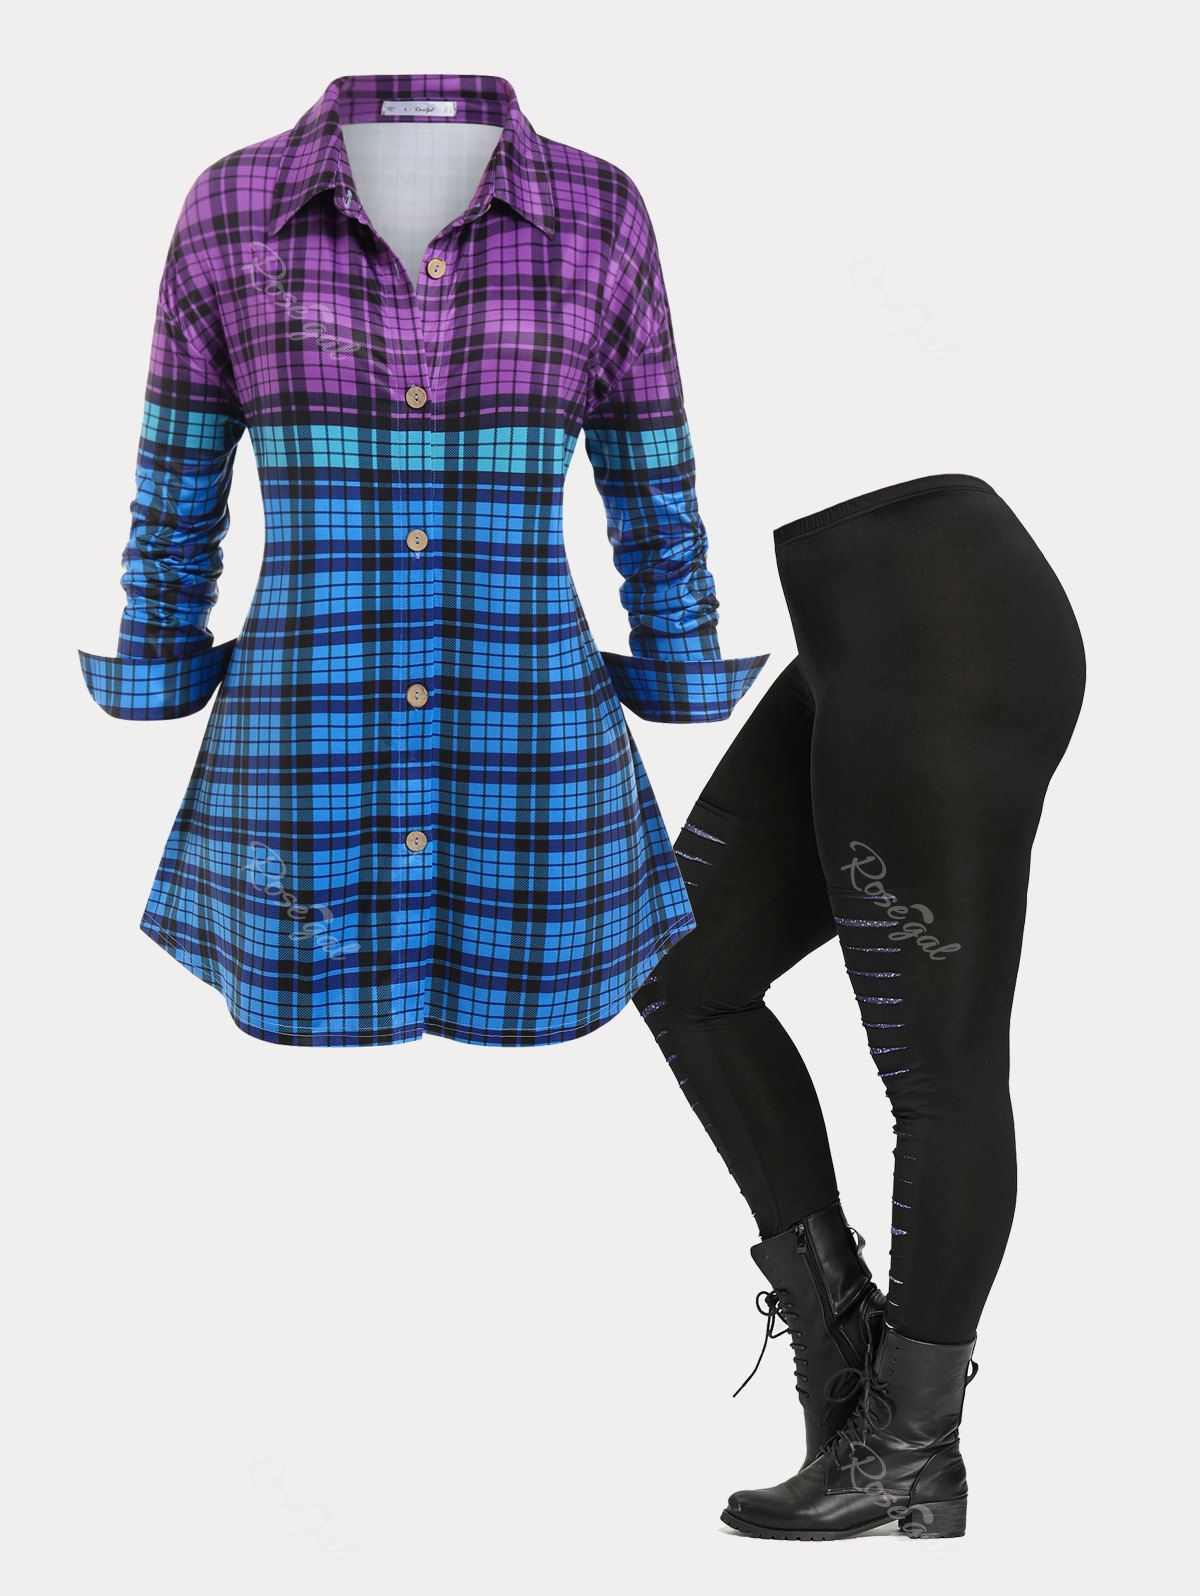 Fashion Contrast Plaid Button Up Shirt and Galaxy Ripped Leggings Plus Size Outfit  